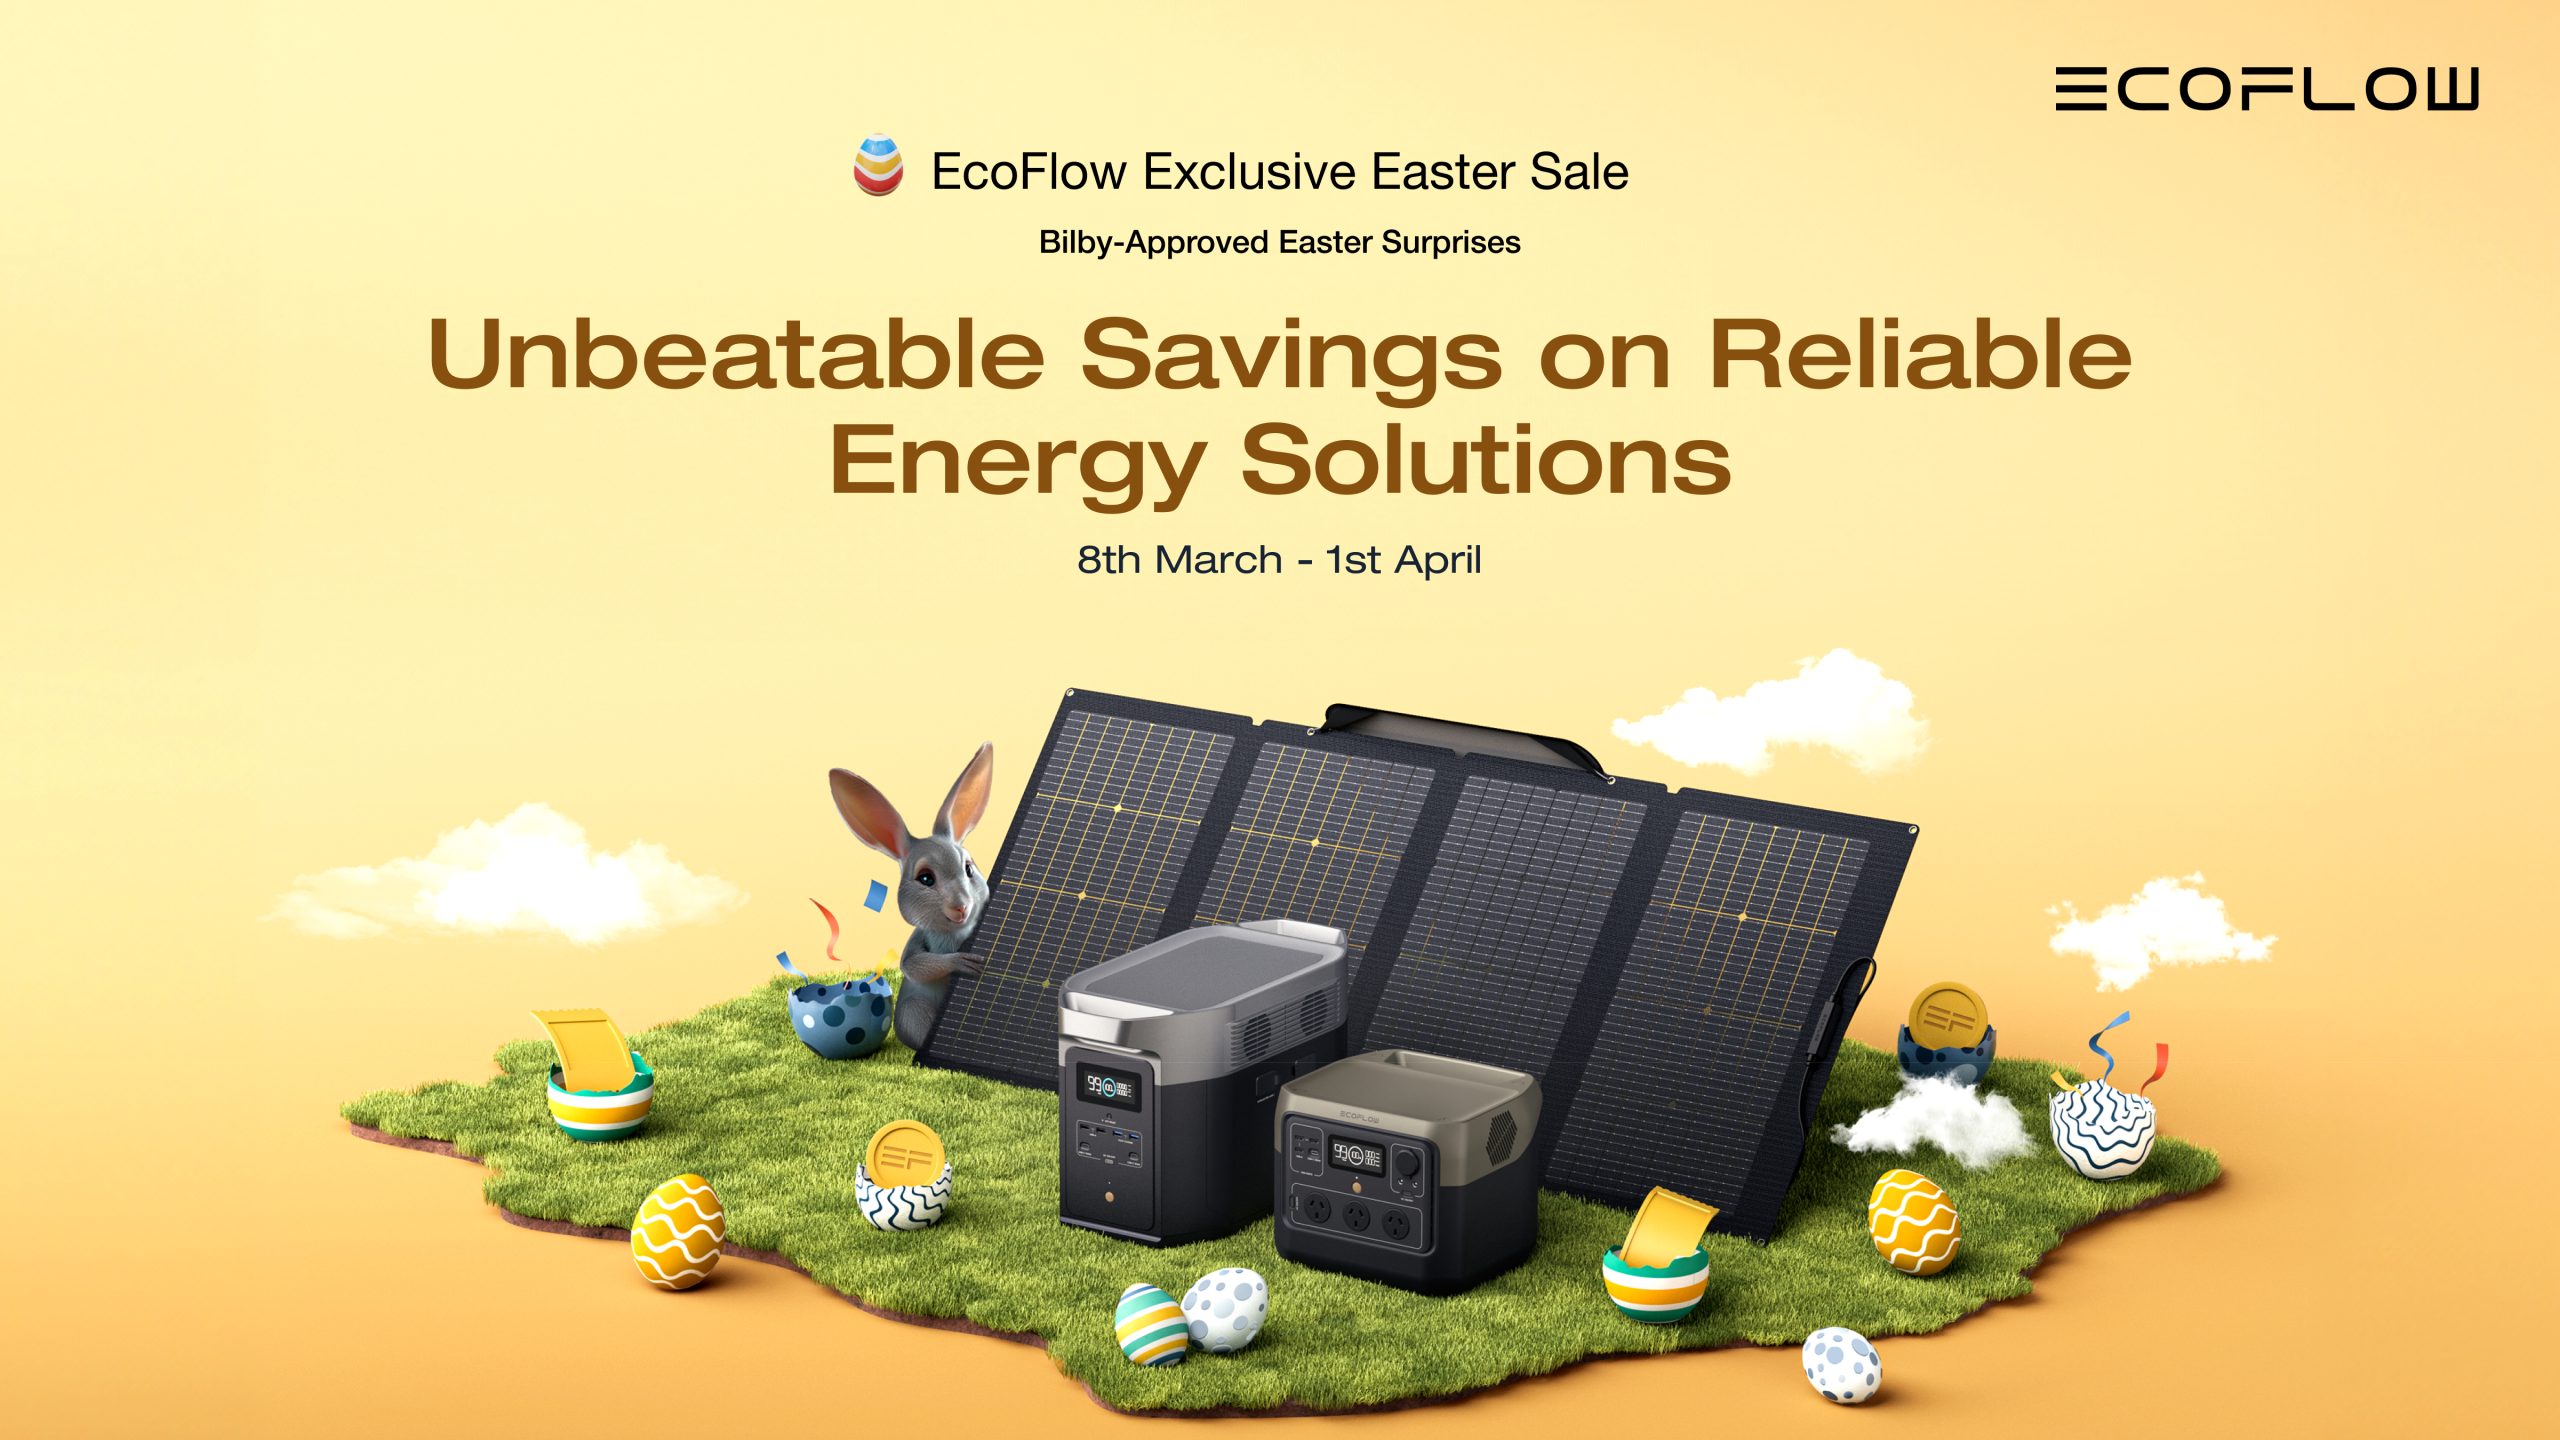 Power Up Your Easter with Unbeatable Deals from EcoFlow